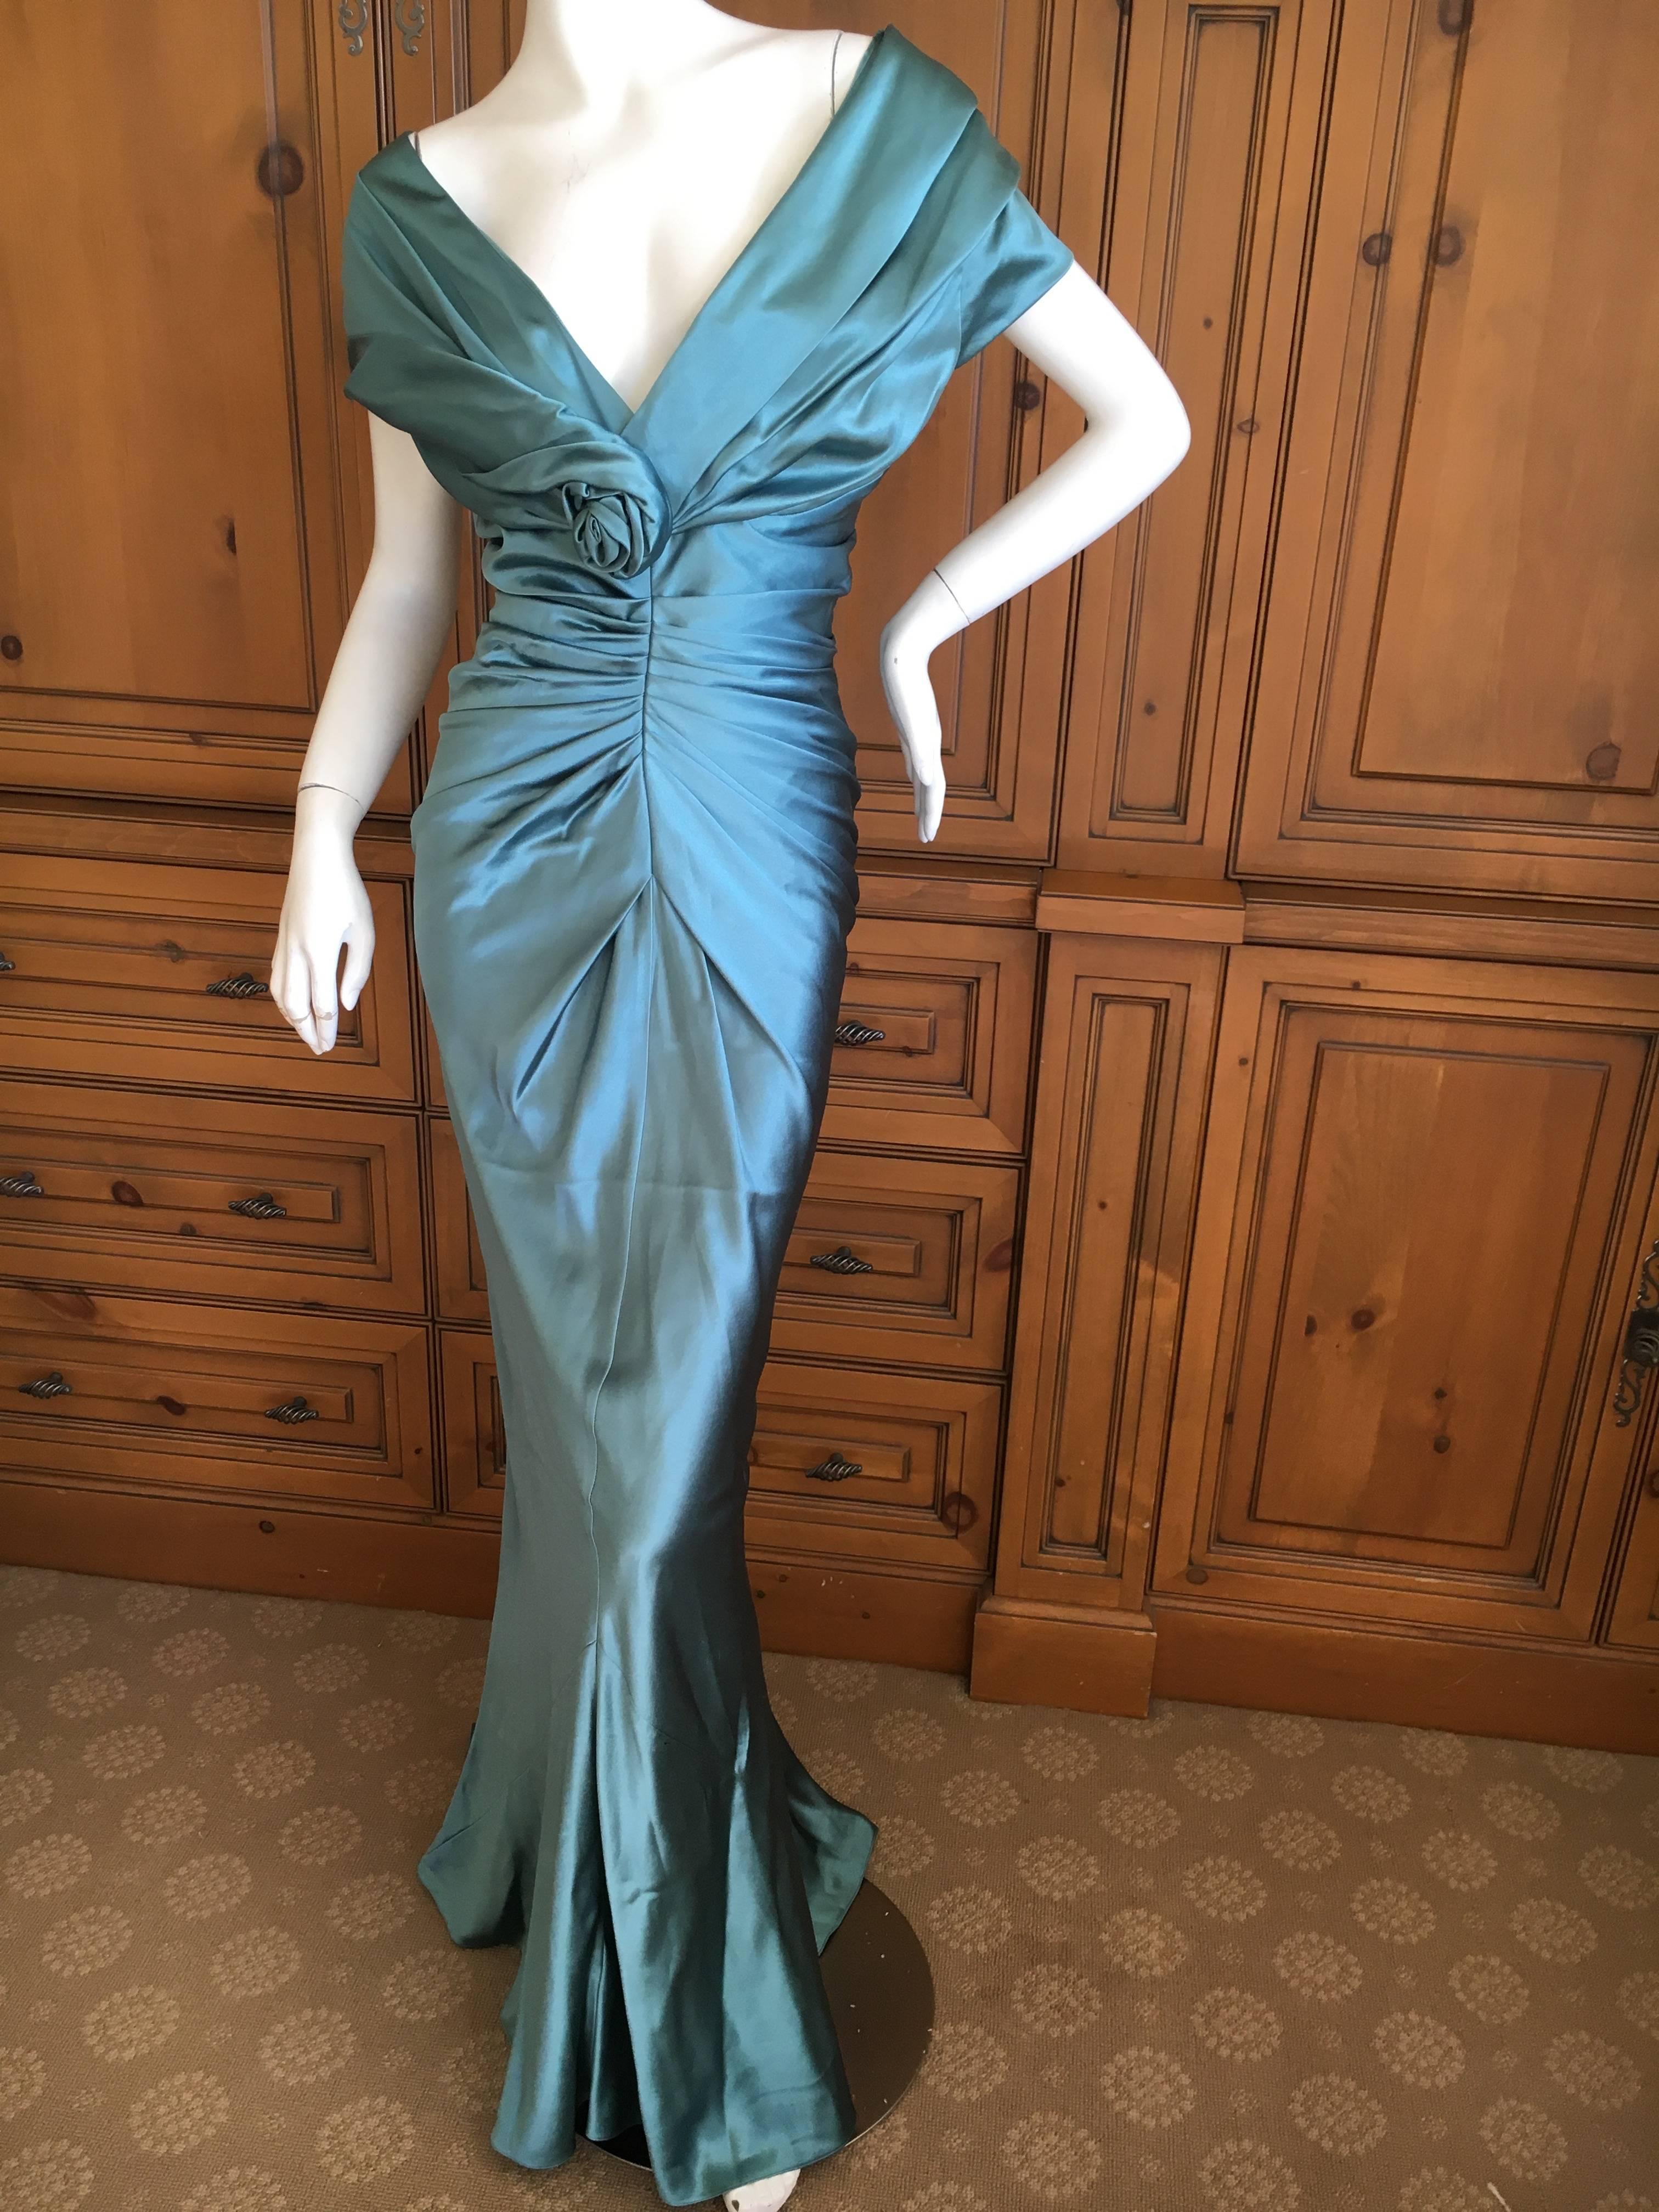 Christian Dior by John Galliano Exquisite Low Cut Silk Evening Dress .
Stunning silk gown in a luscious shade of blue, with a low cut and cowl back.
Size 42
Bust 42